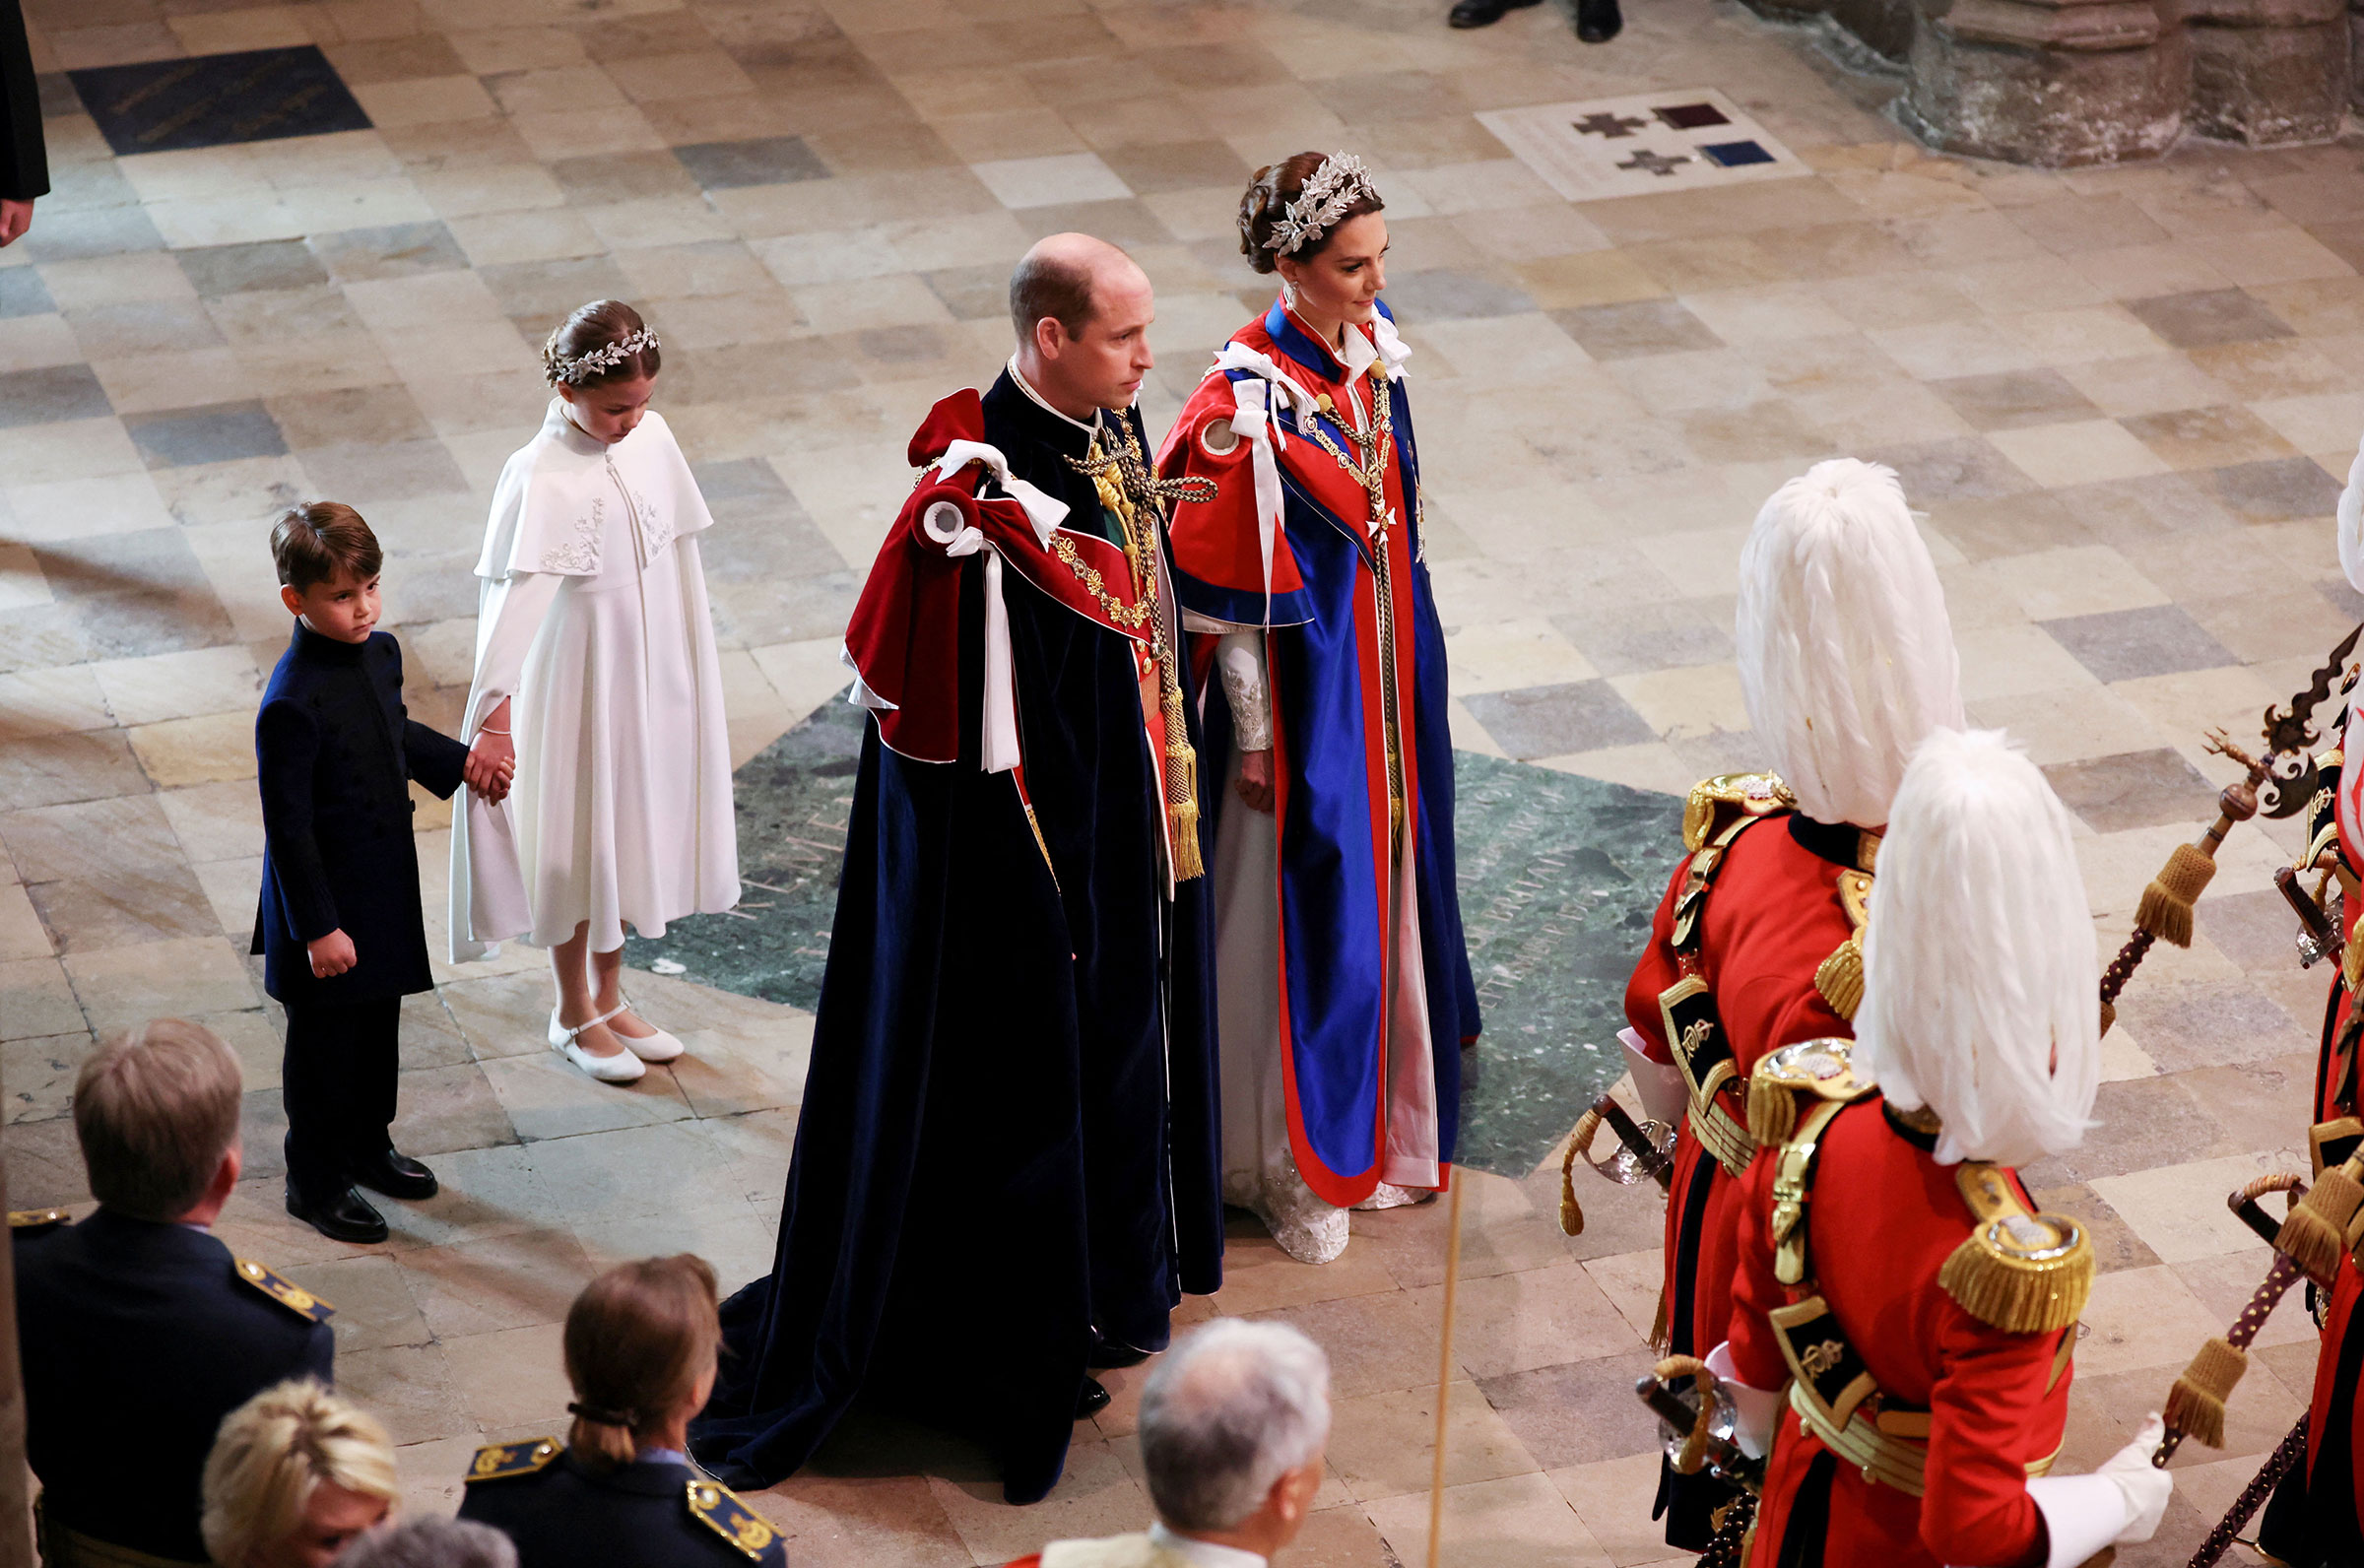 Prince William and Catherine, Princess of Wales, followed by their children Prince Louis and Princess Charlotte, arrive for the Coronation of King Charles III and Queen Camilla. (Phil Noble—WPA Pool/Getty Images)